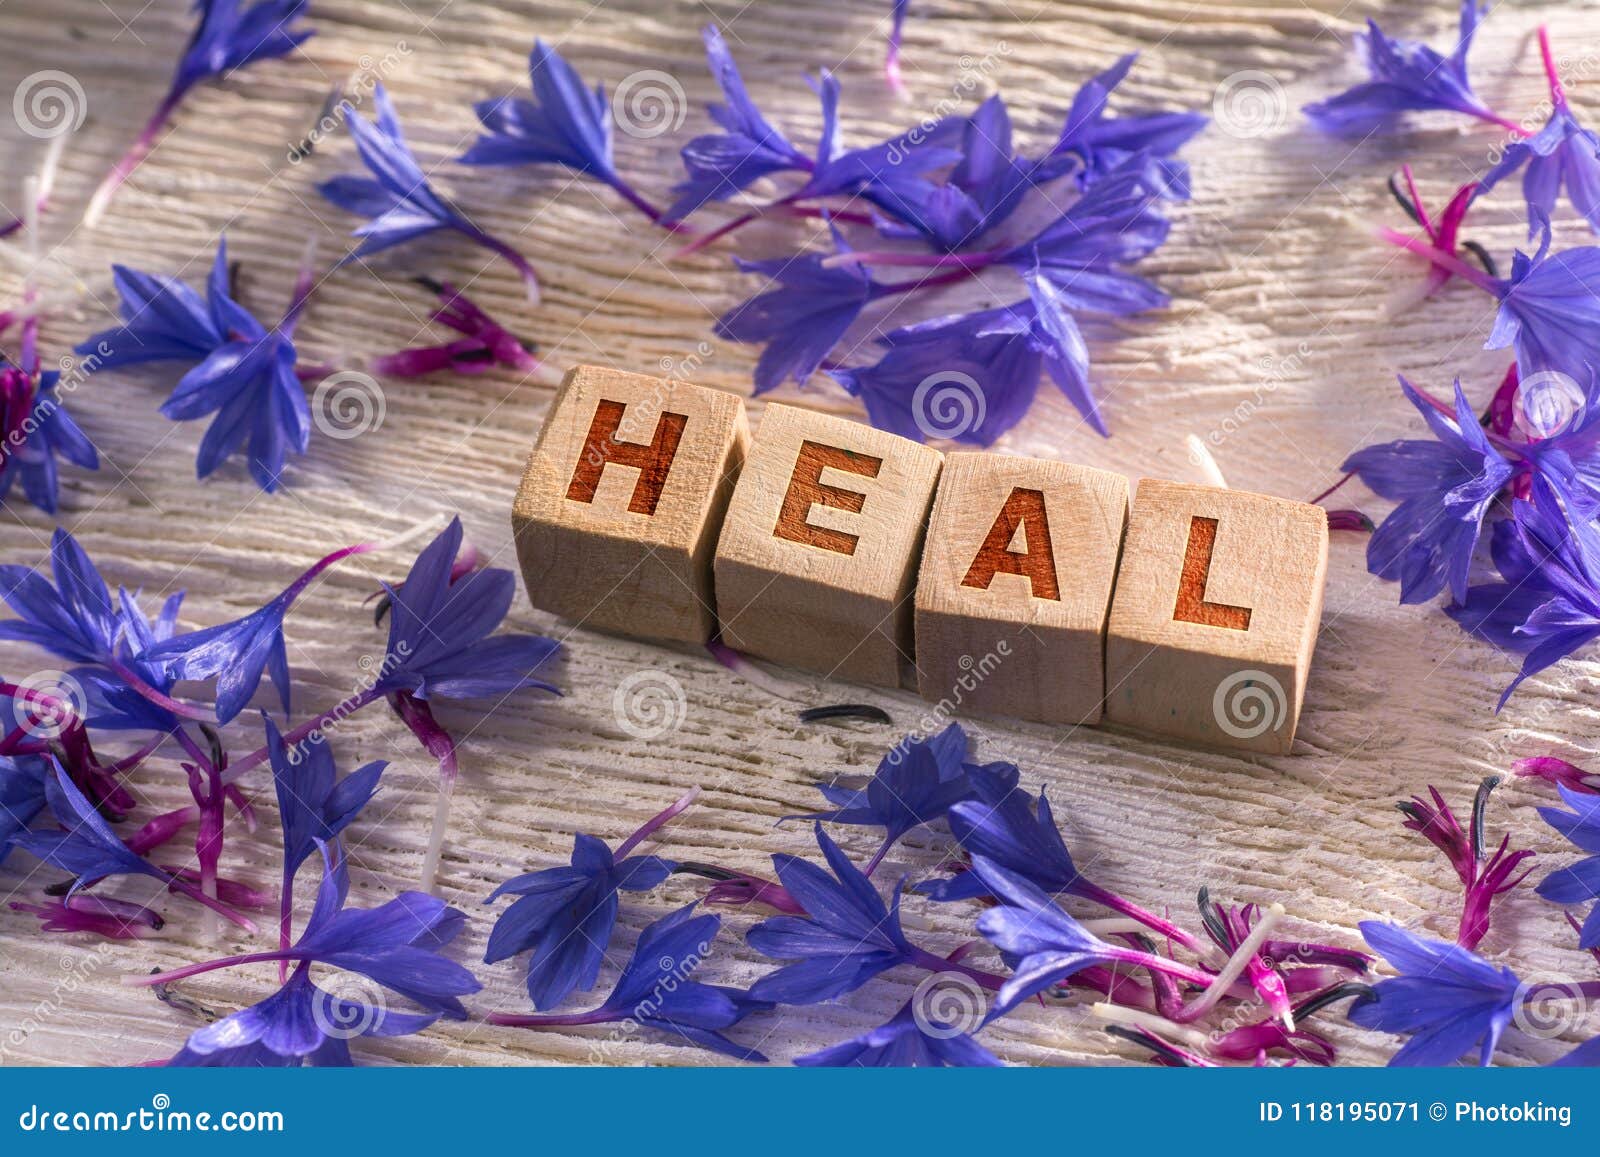 heal on the wooden cubes